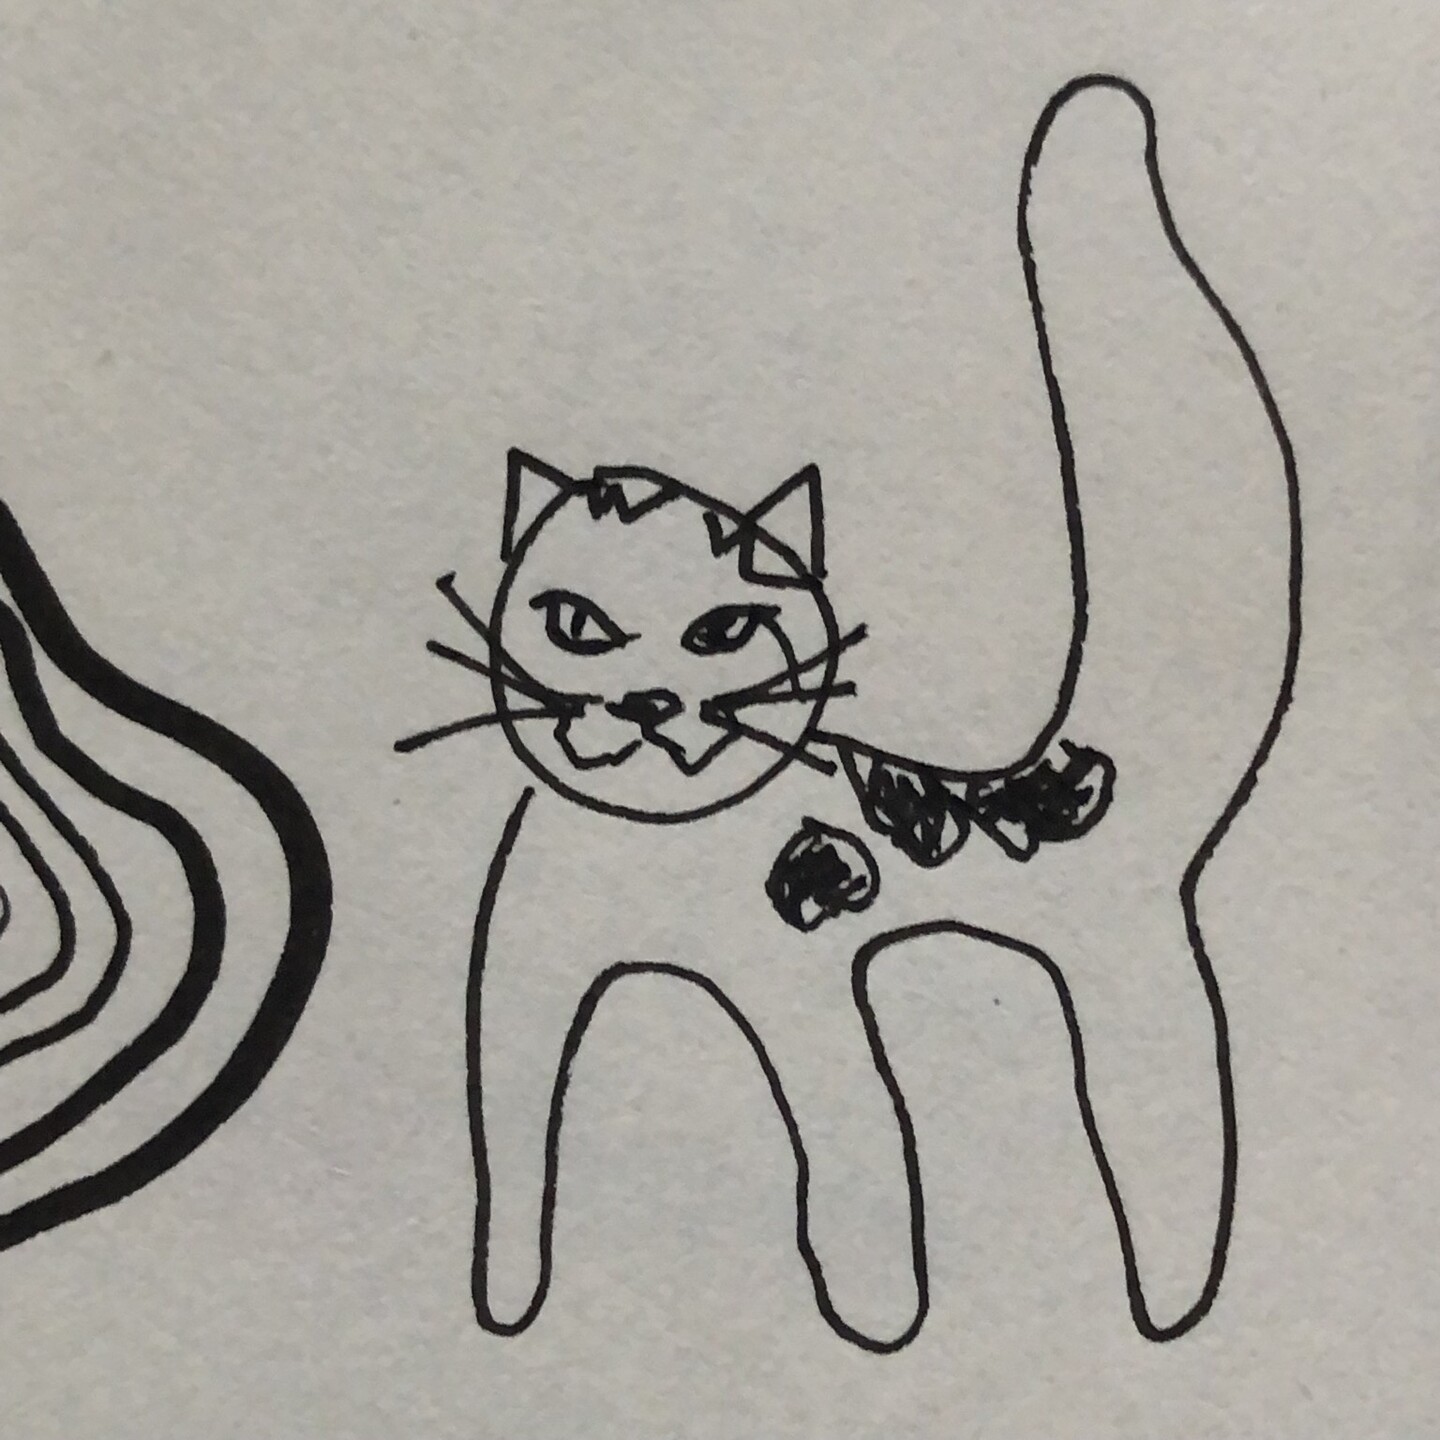 A poorly drawn cat with a mean grin and three legs.